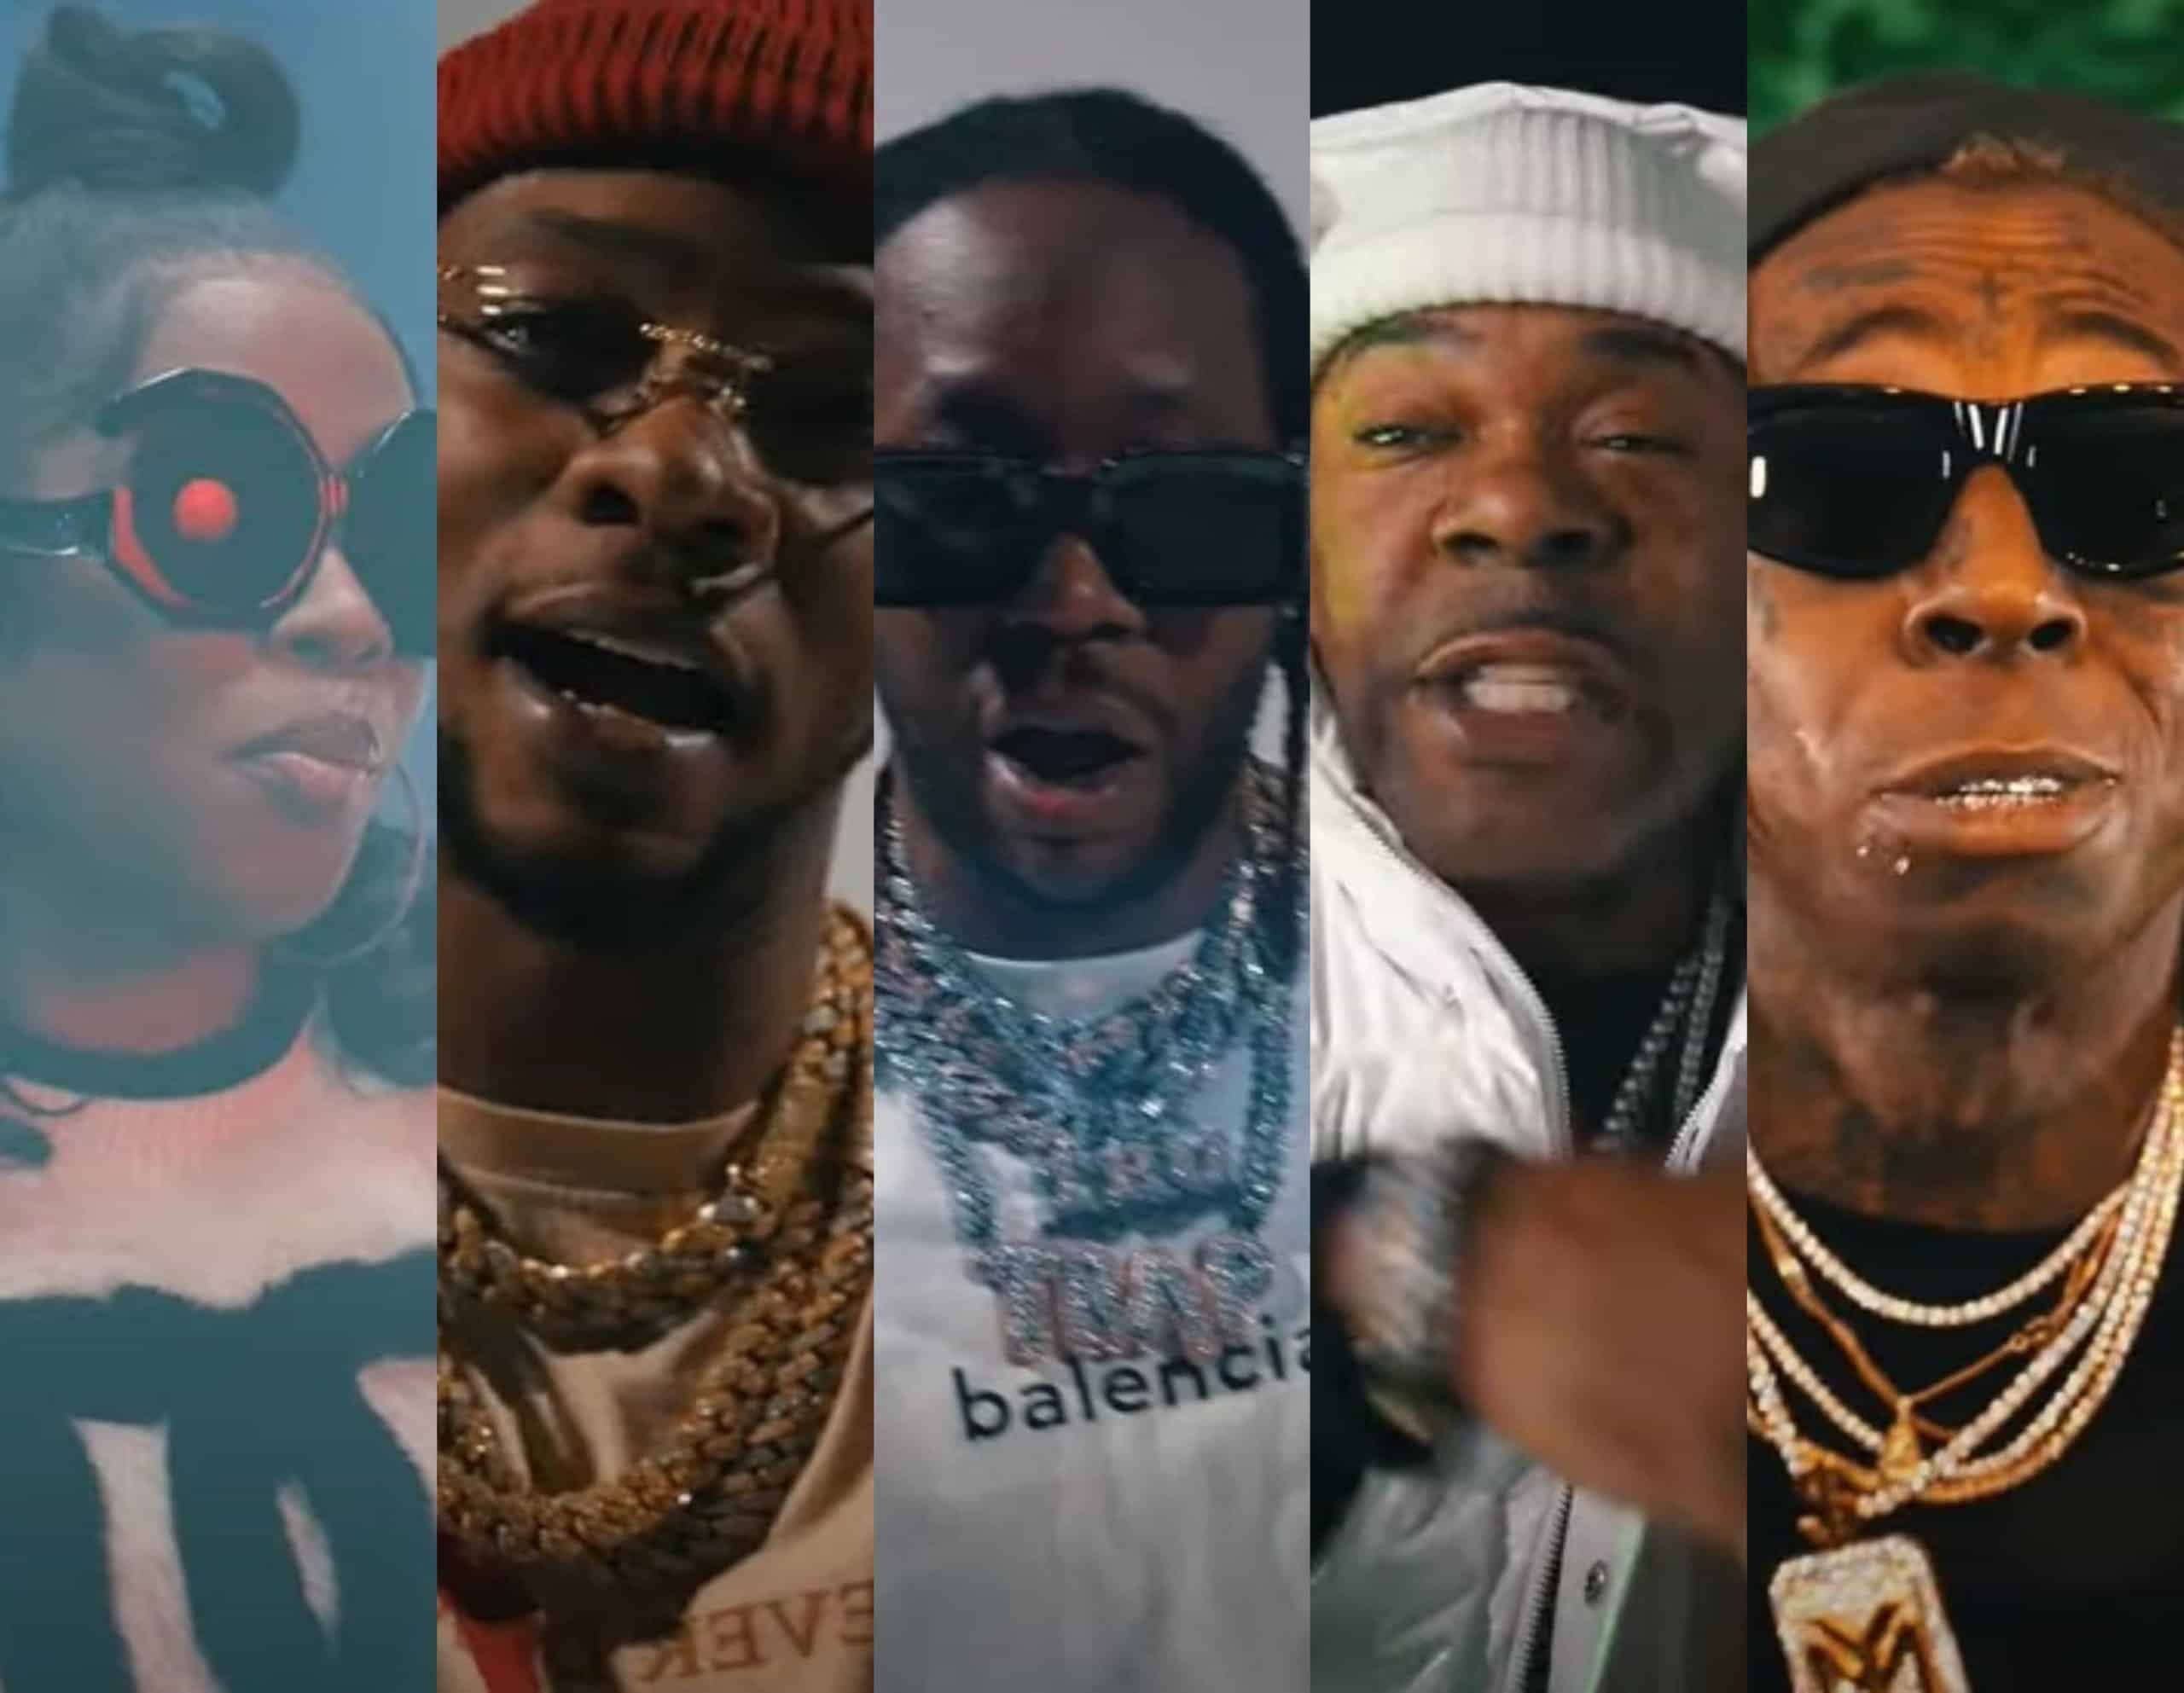 New Video Papoose - Thought I Was Gonna Stop (Remix) (Ft. Lil Wayne, Busta Rhymes, 2 Chainz & Remy Ma)